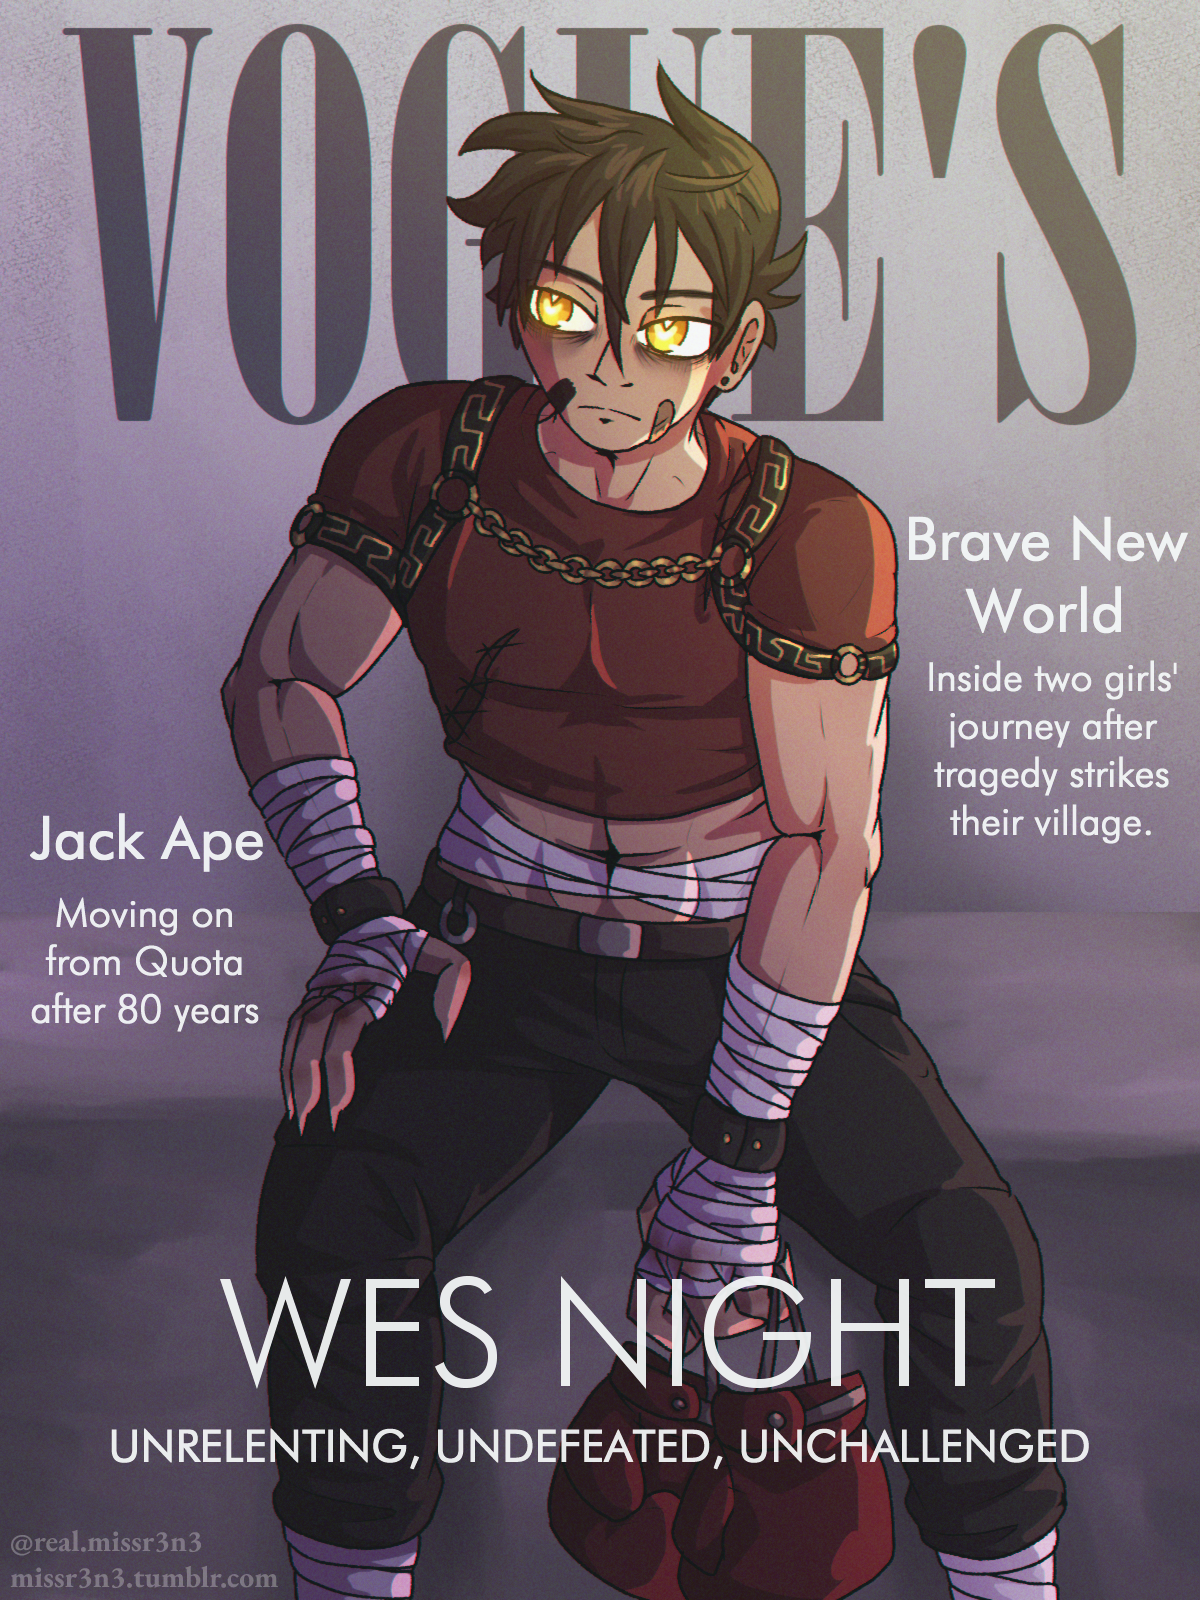 wes night from rad mad venture on the cover of a mock issue for Vogue's magazine, styled after Vogue. text at the bottom reads 'Wes Night: Unrelenting, Undefeated, Unchallenged.' text to his left reads 'Jack Ape: Moving on from Quota after 80 years.' text to his right reads 'Brave New World: Inside two girl's journey after tragedy strikes their village.'